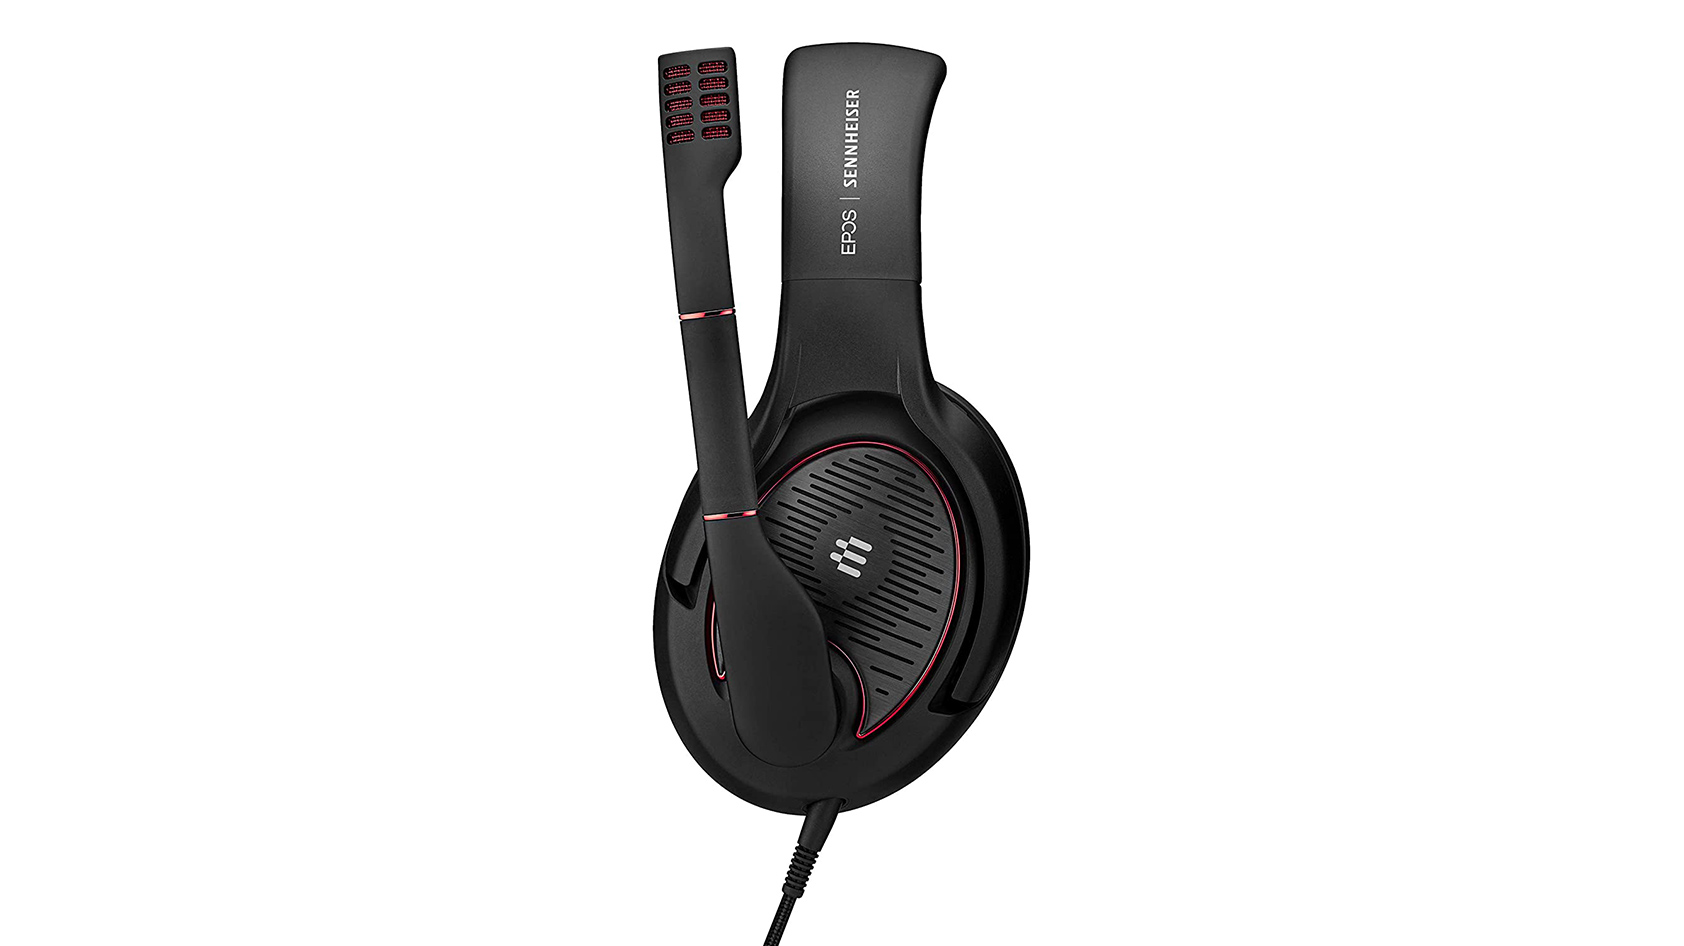 The Sennheiser GAME ONE gaming headset in black/red against a white background.